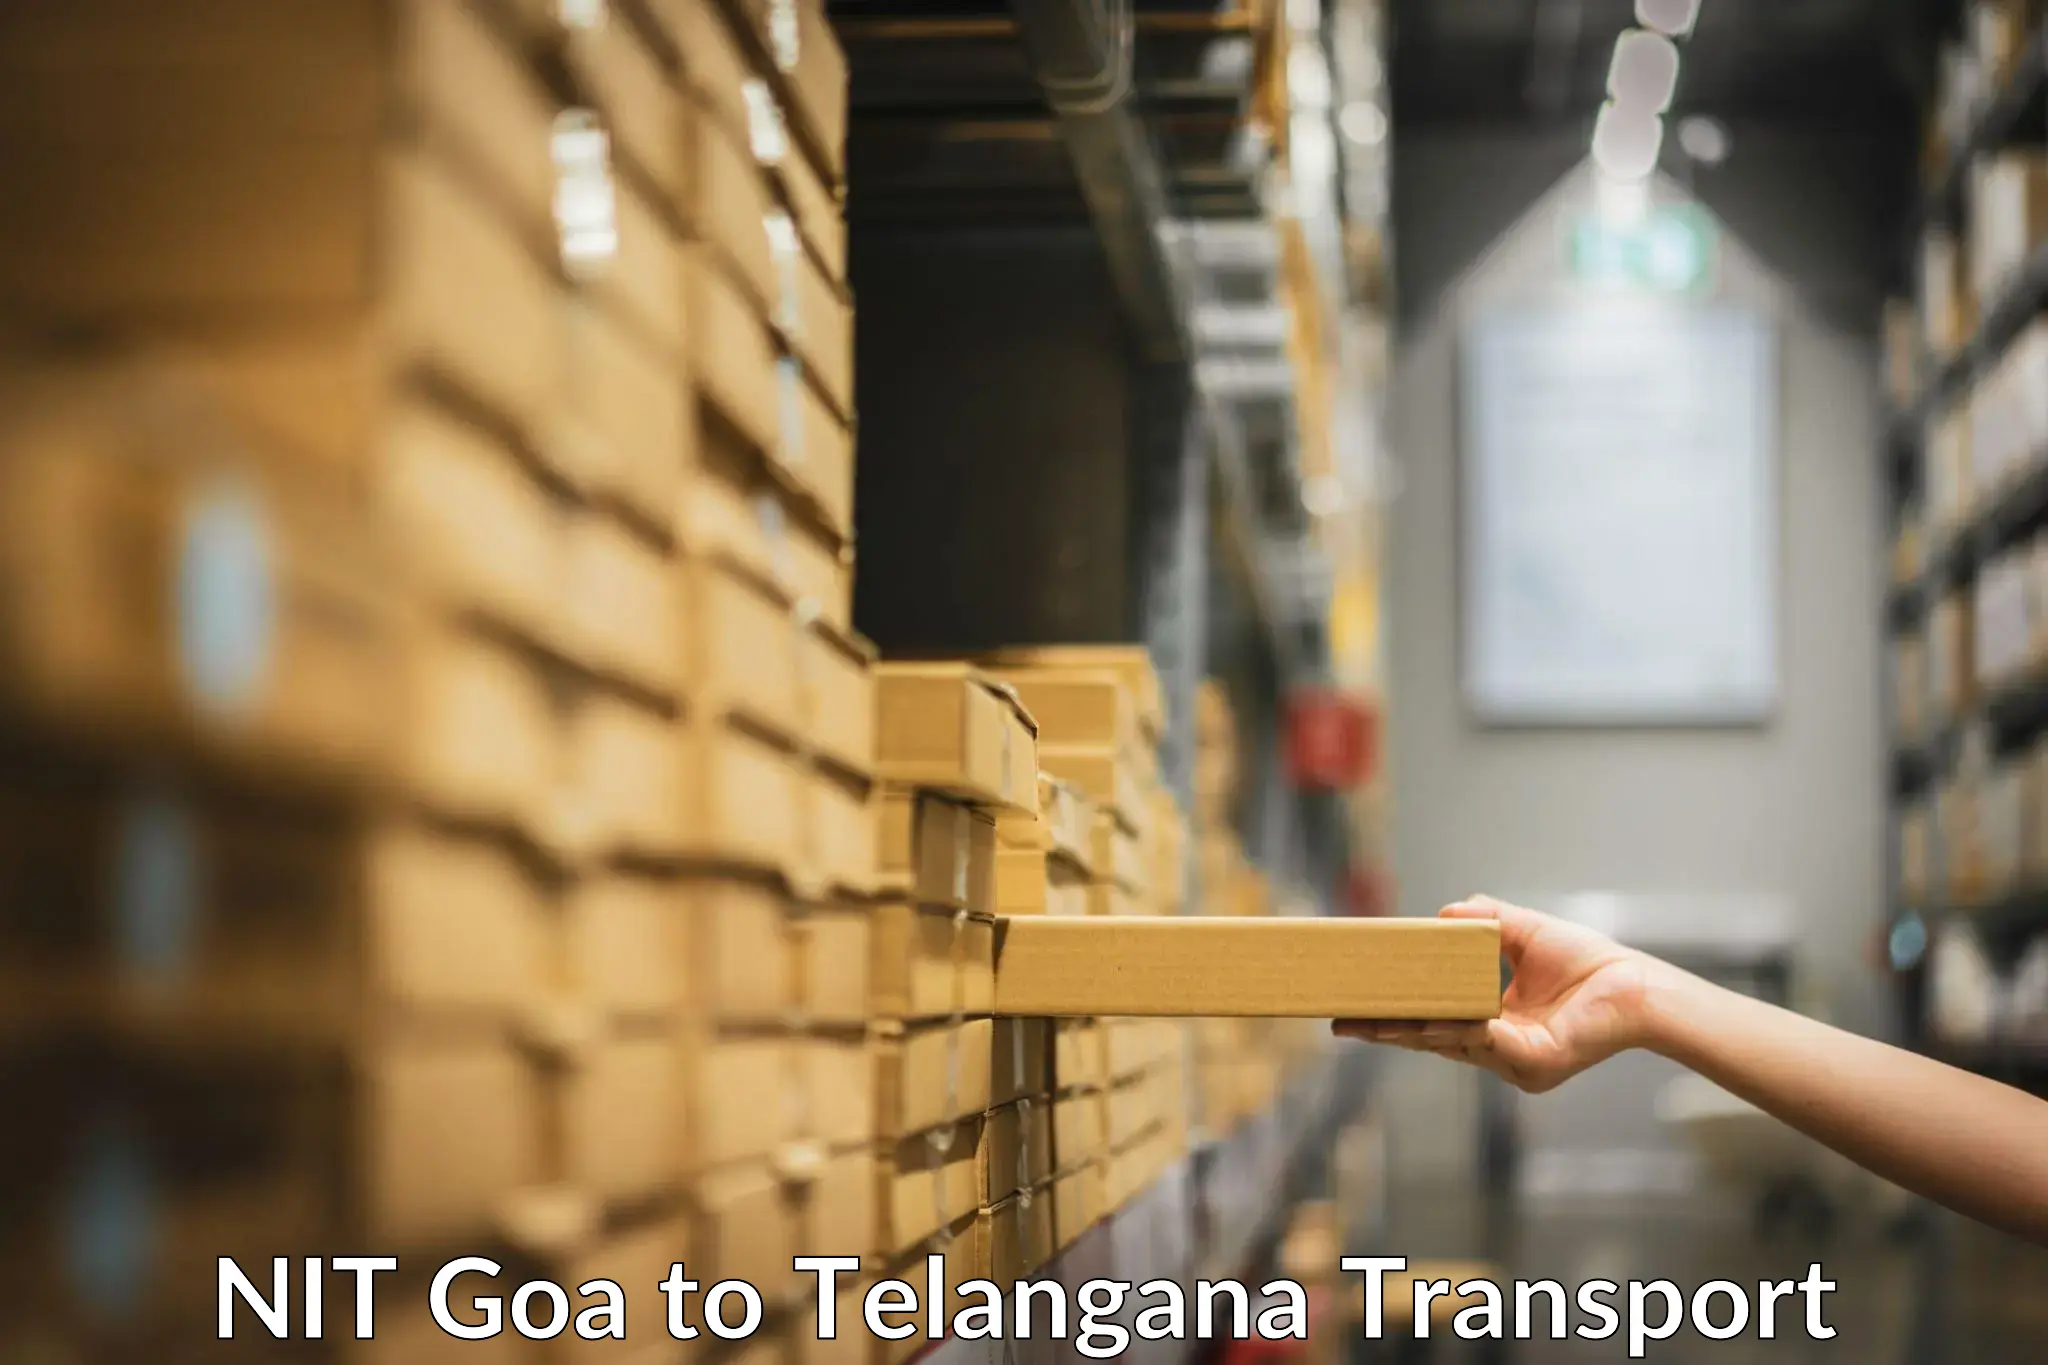 Cargo train transport services NIT Goa to Secunderabad